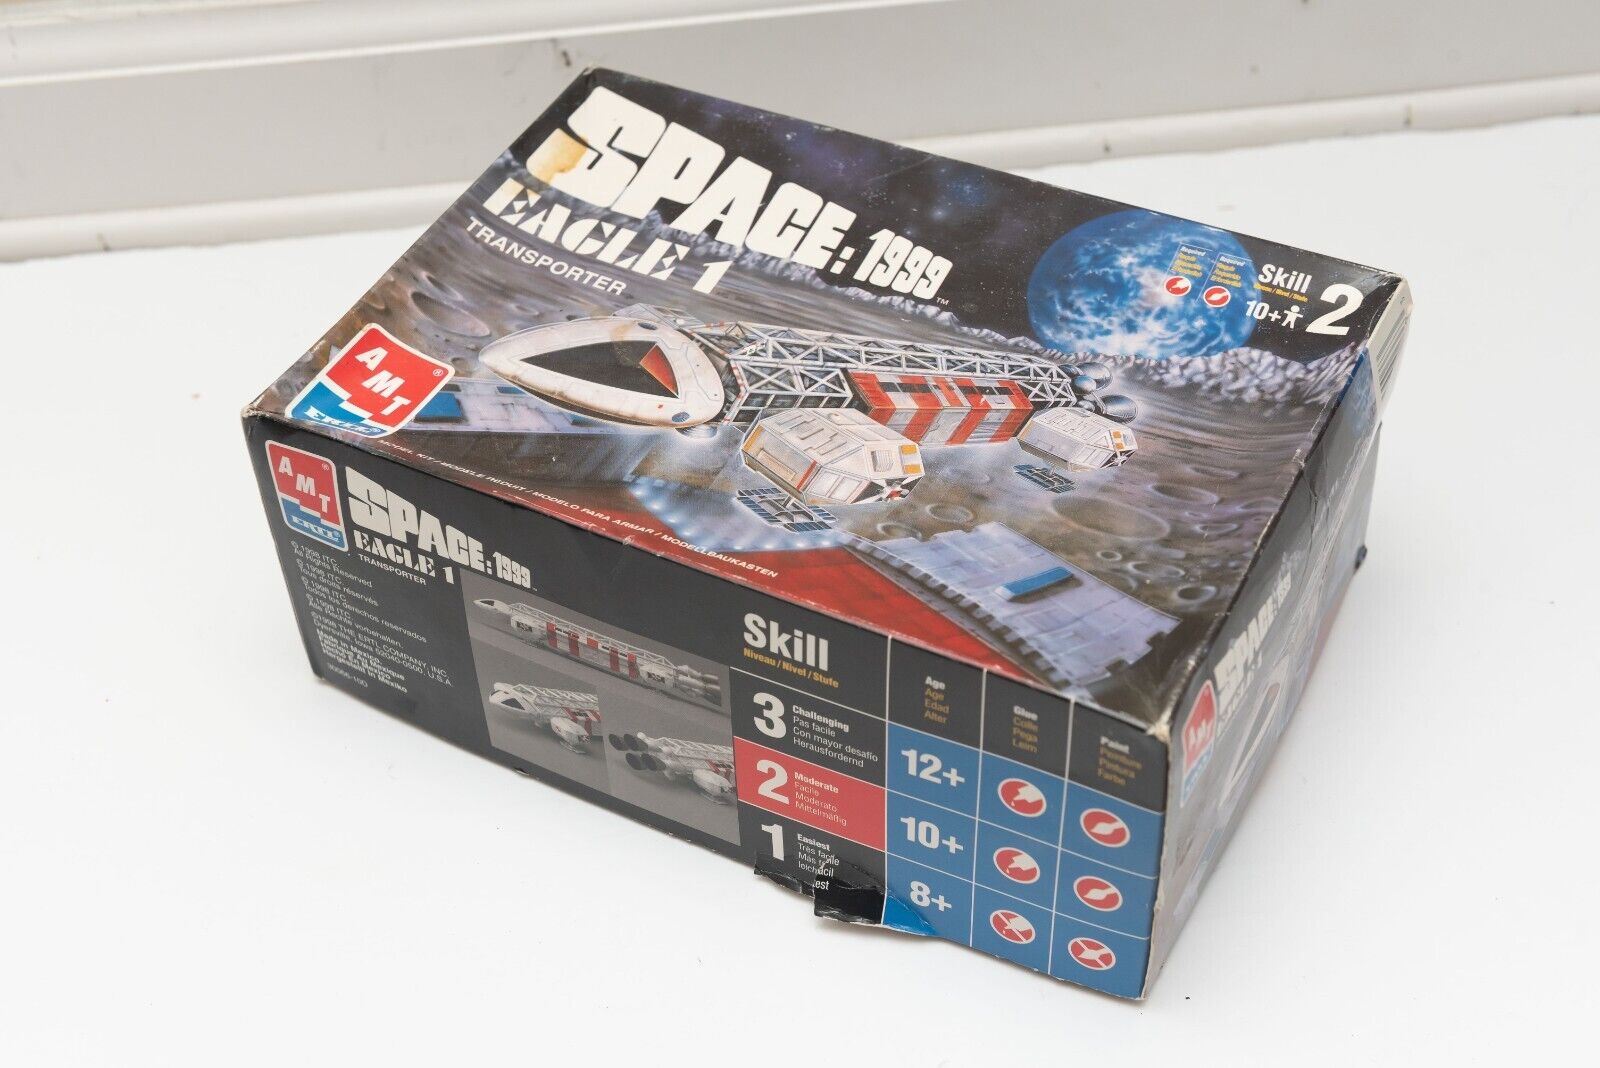 Space:1999 Eagle 1 Transporter New in Box